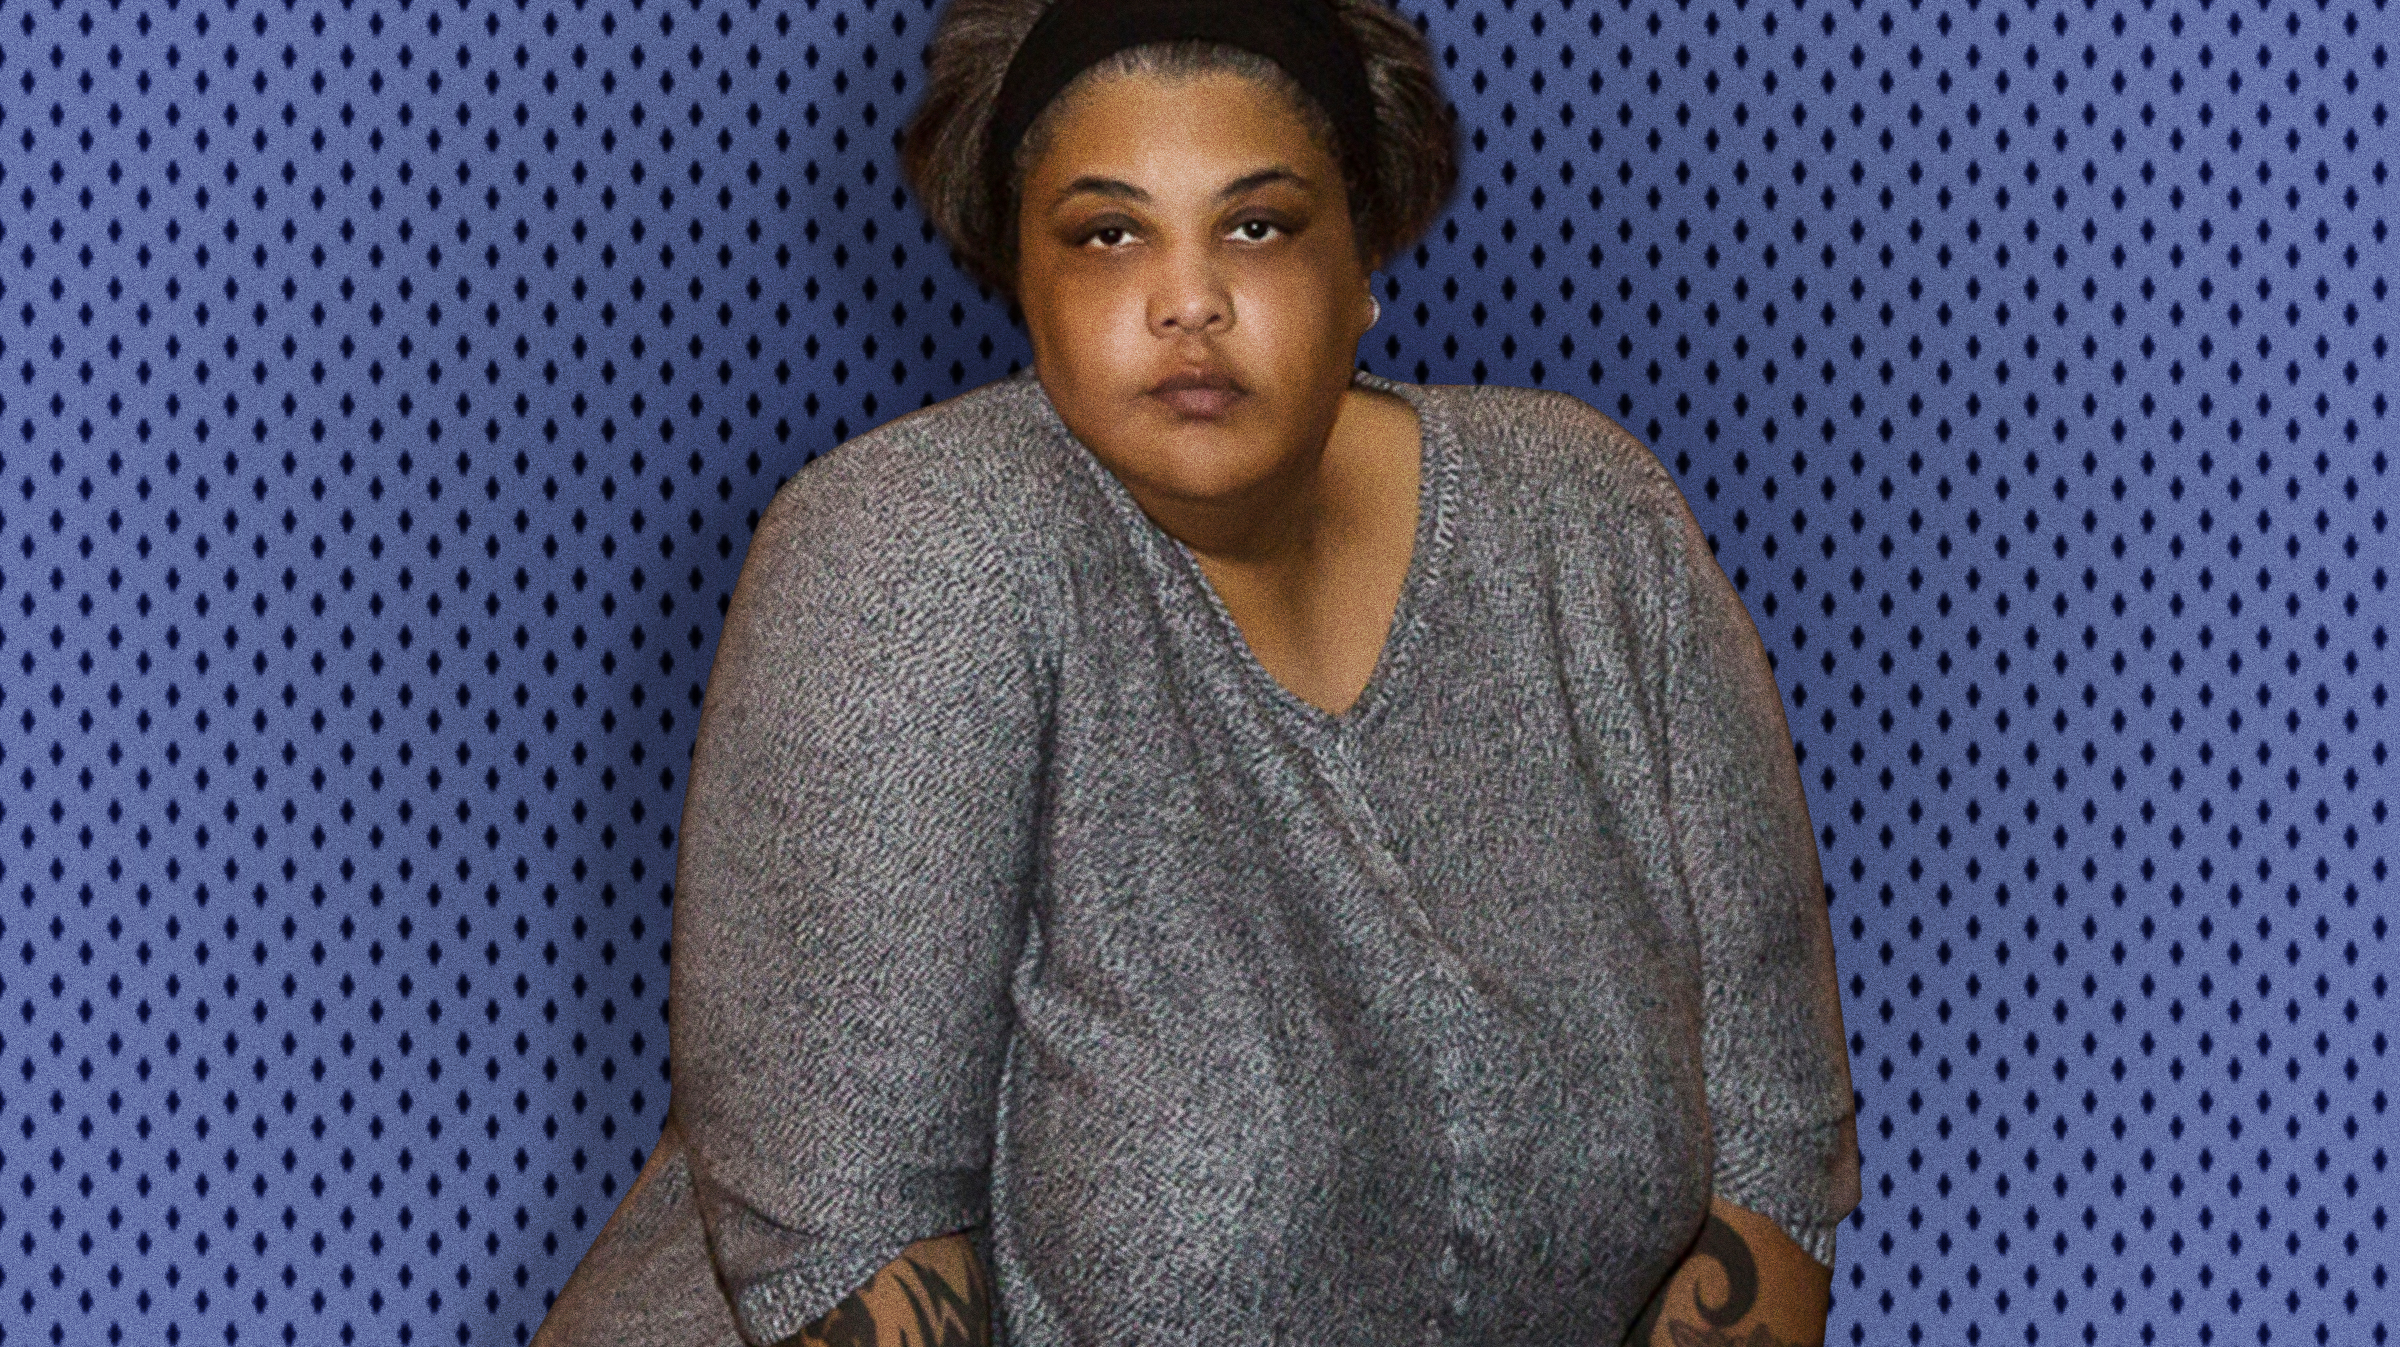 synopsis of the book hunger by roxane gay